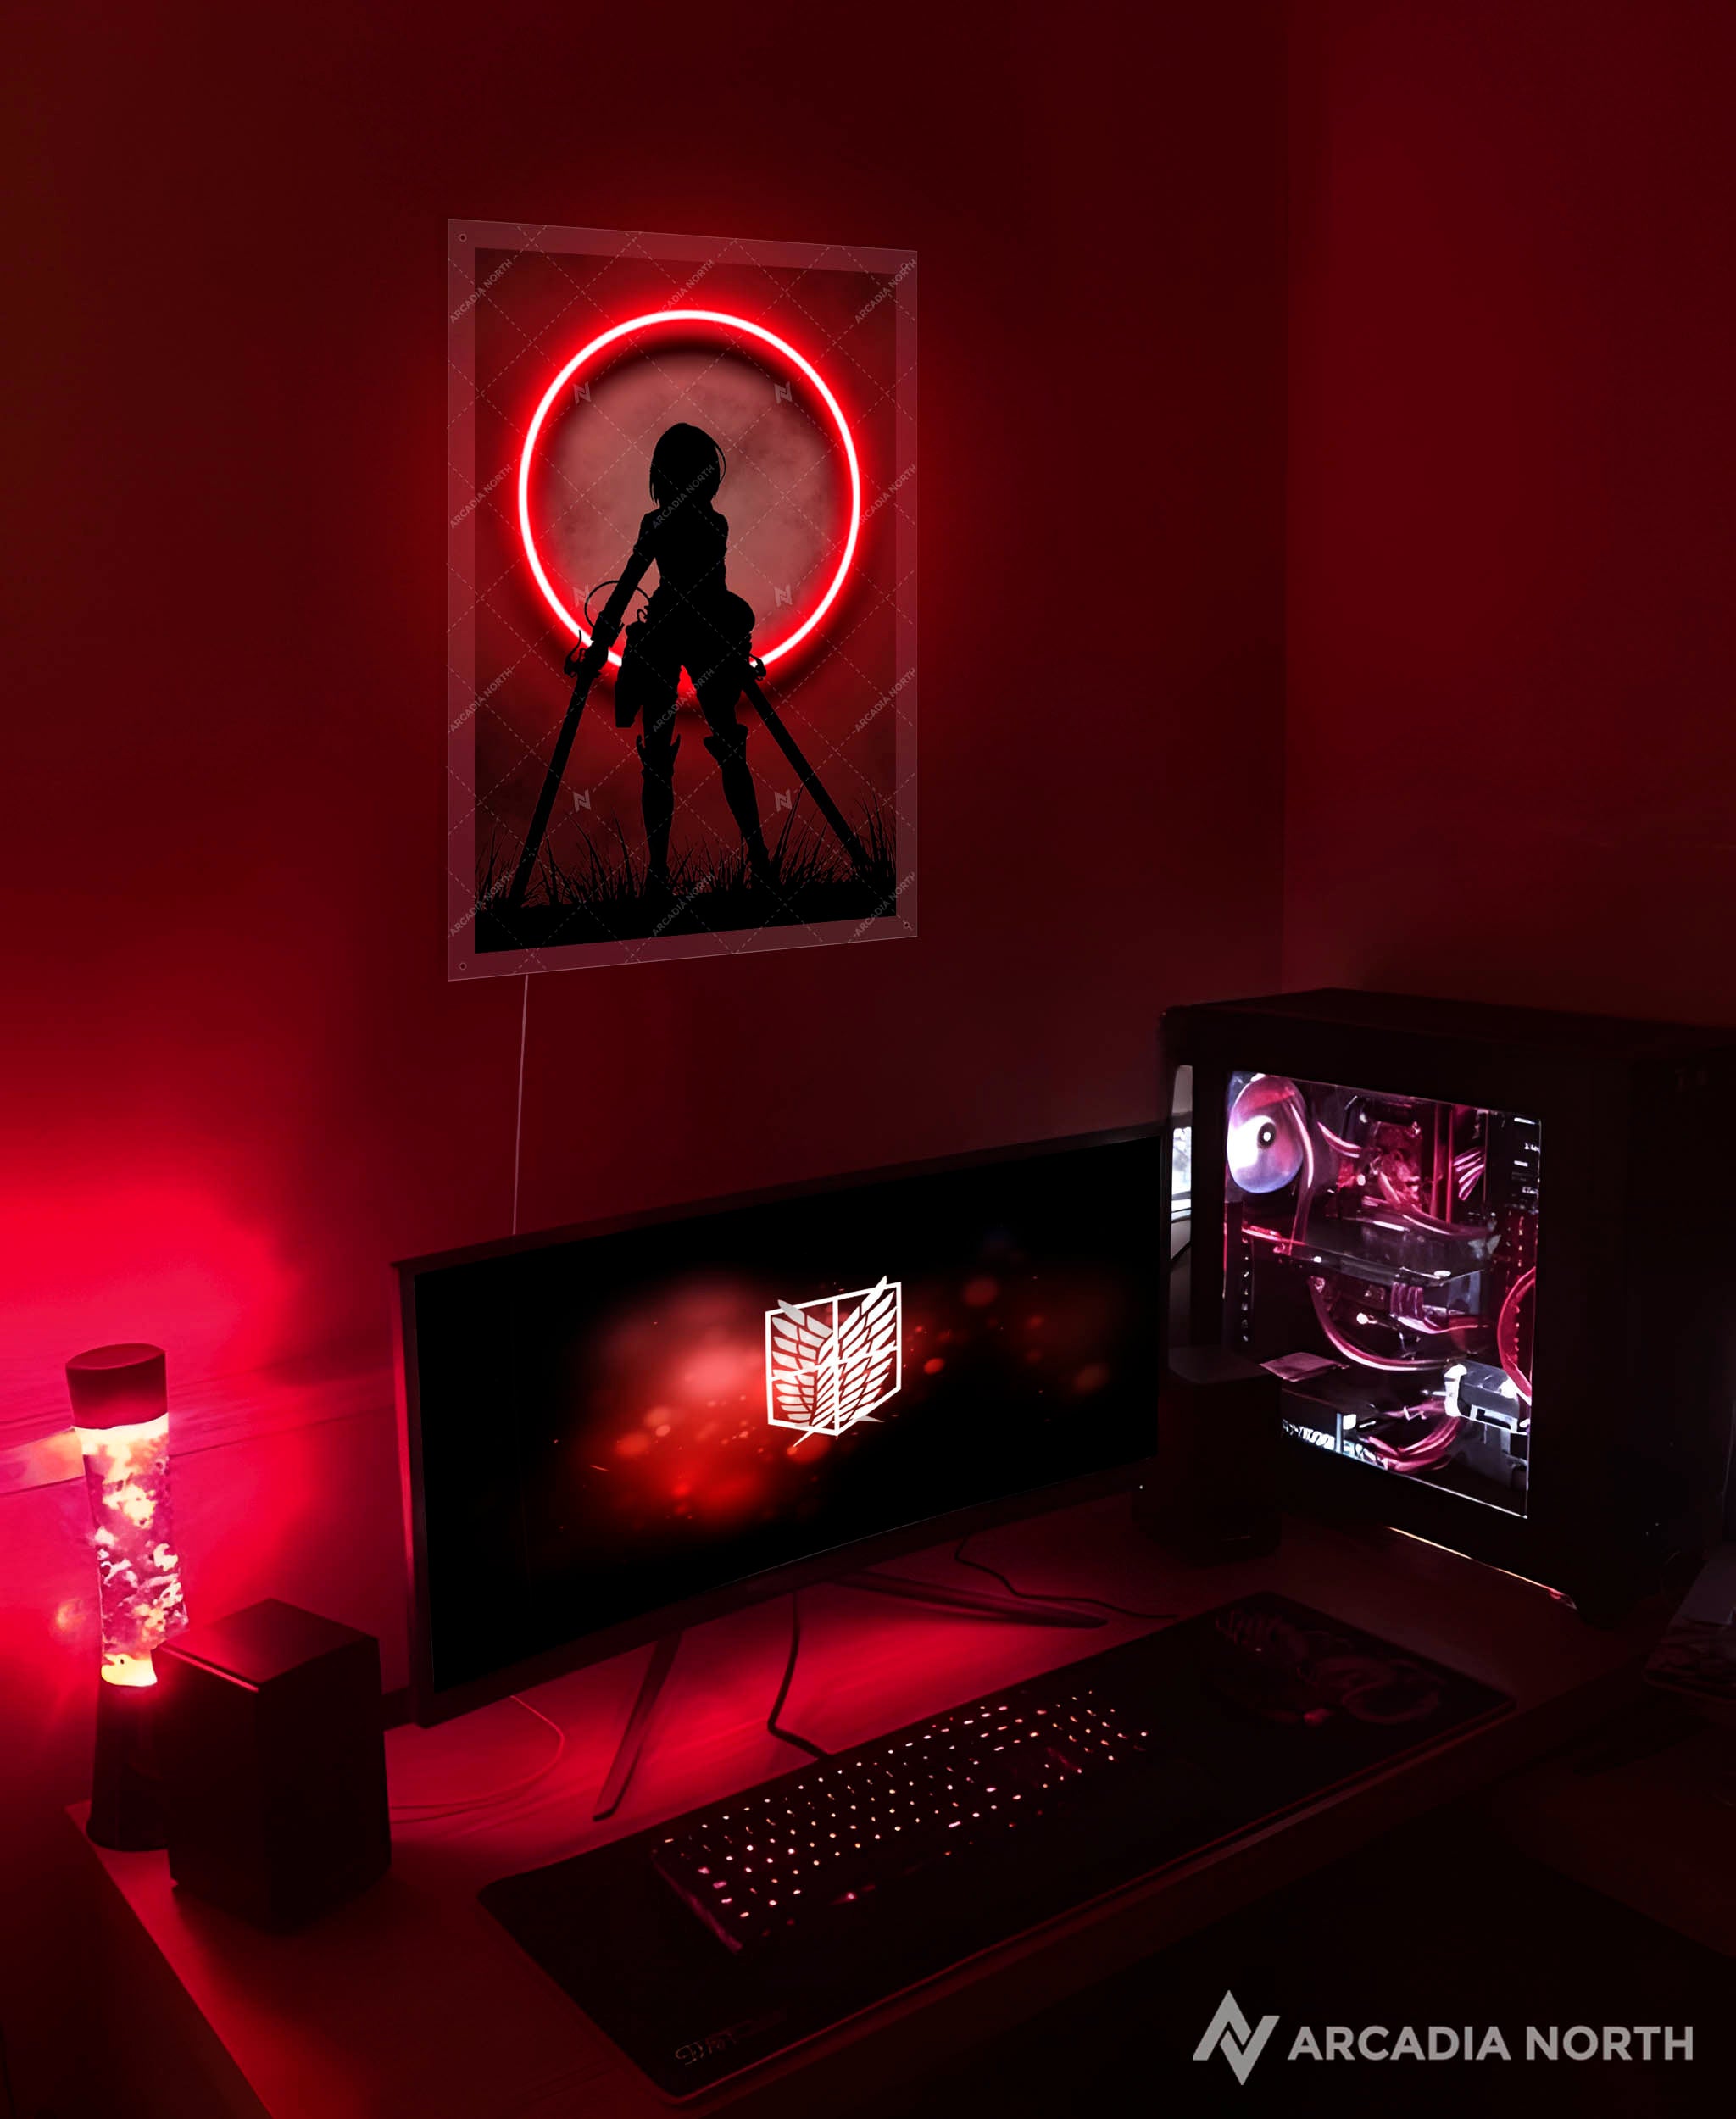 Arcadia North AURALIGHT - an LED Poster featuring the anime Attack on Titan with Mikasa Ackerman standing in front of a red moon illuminated by glowing neon LED lights. UV-printed on acrylic.